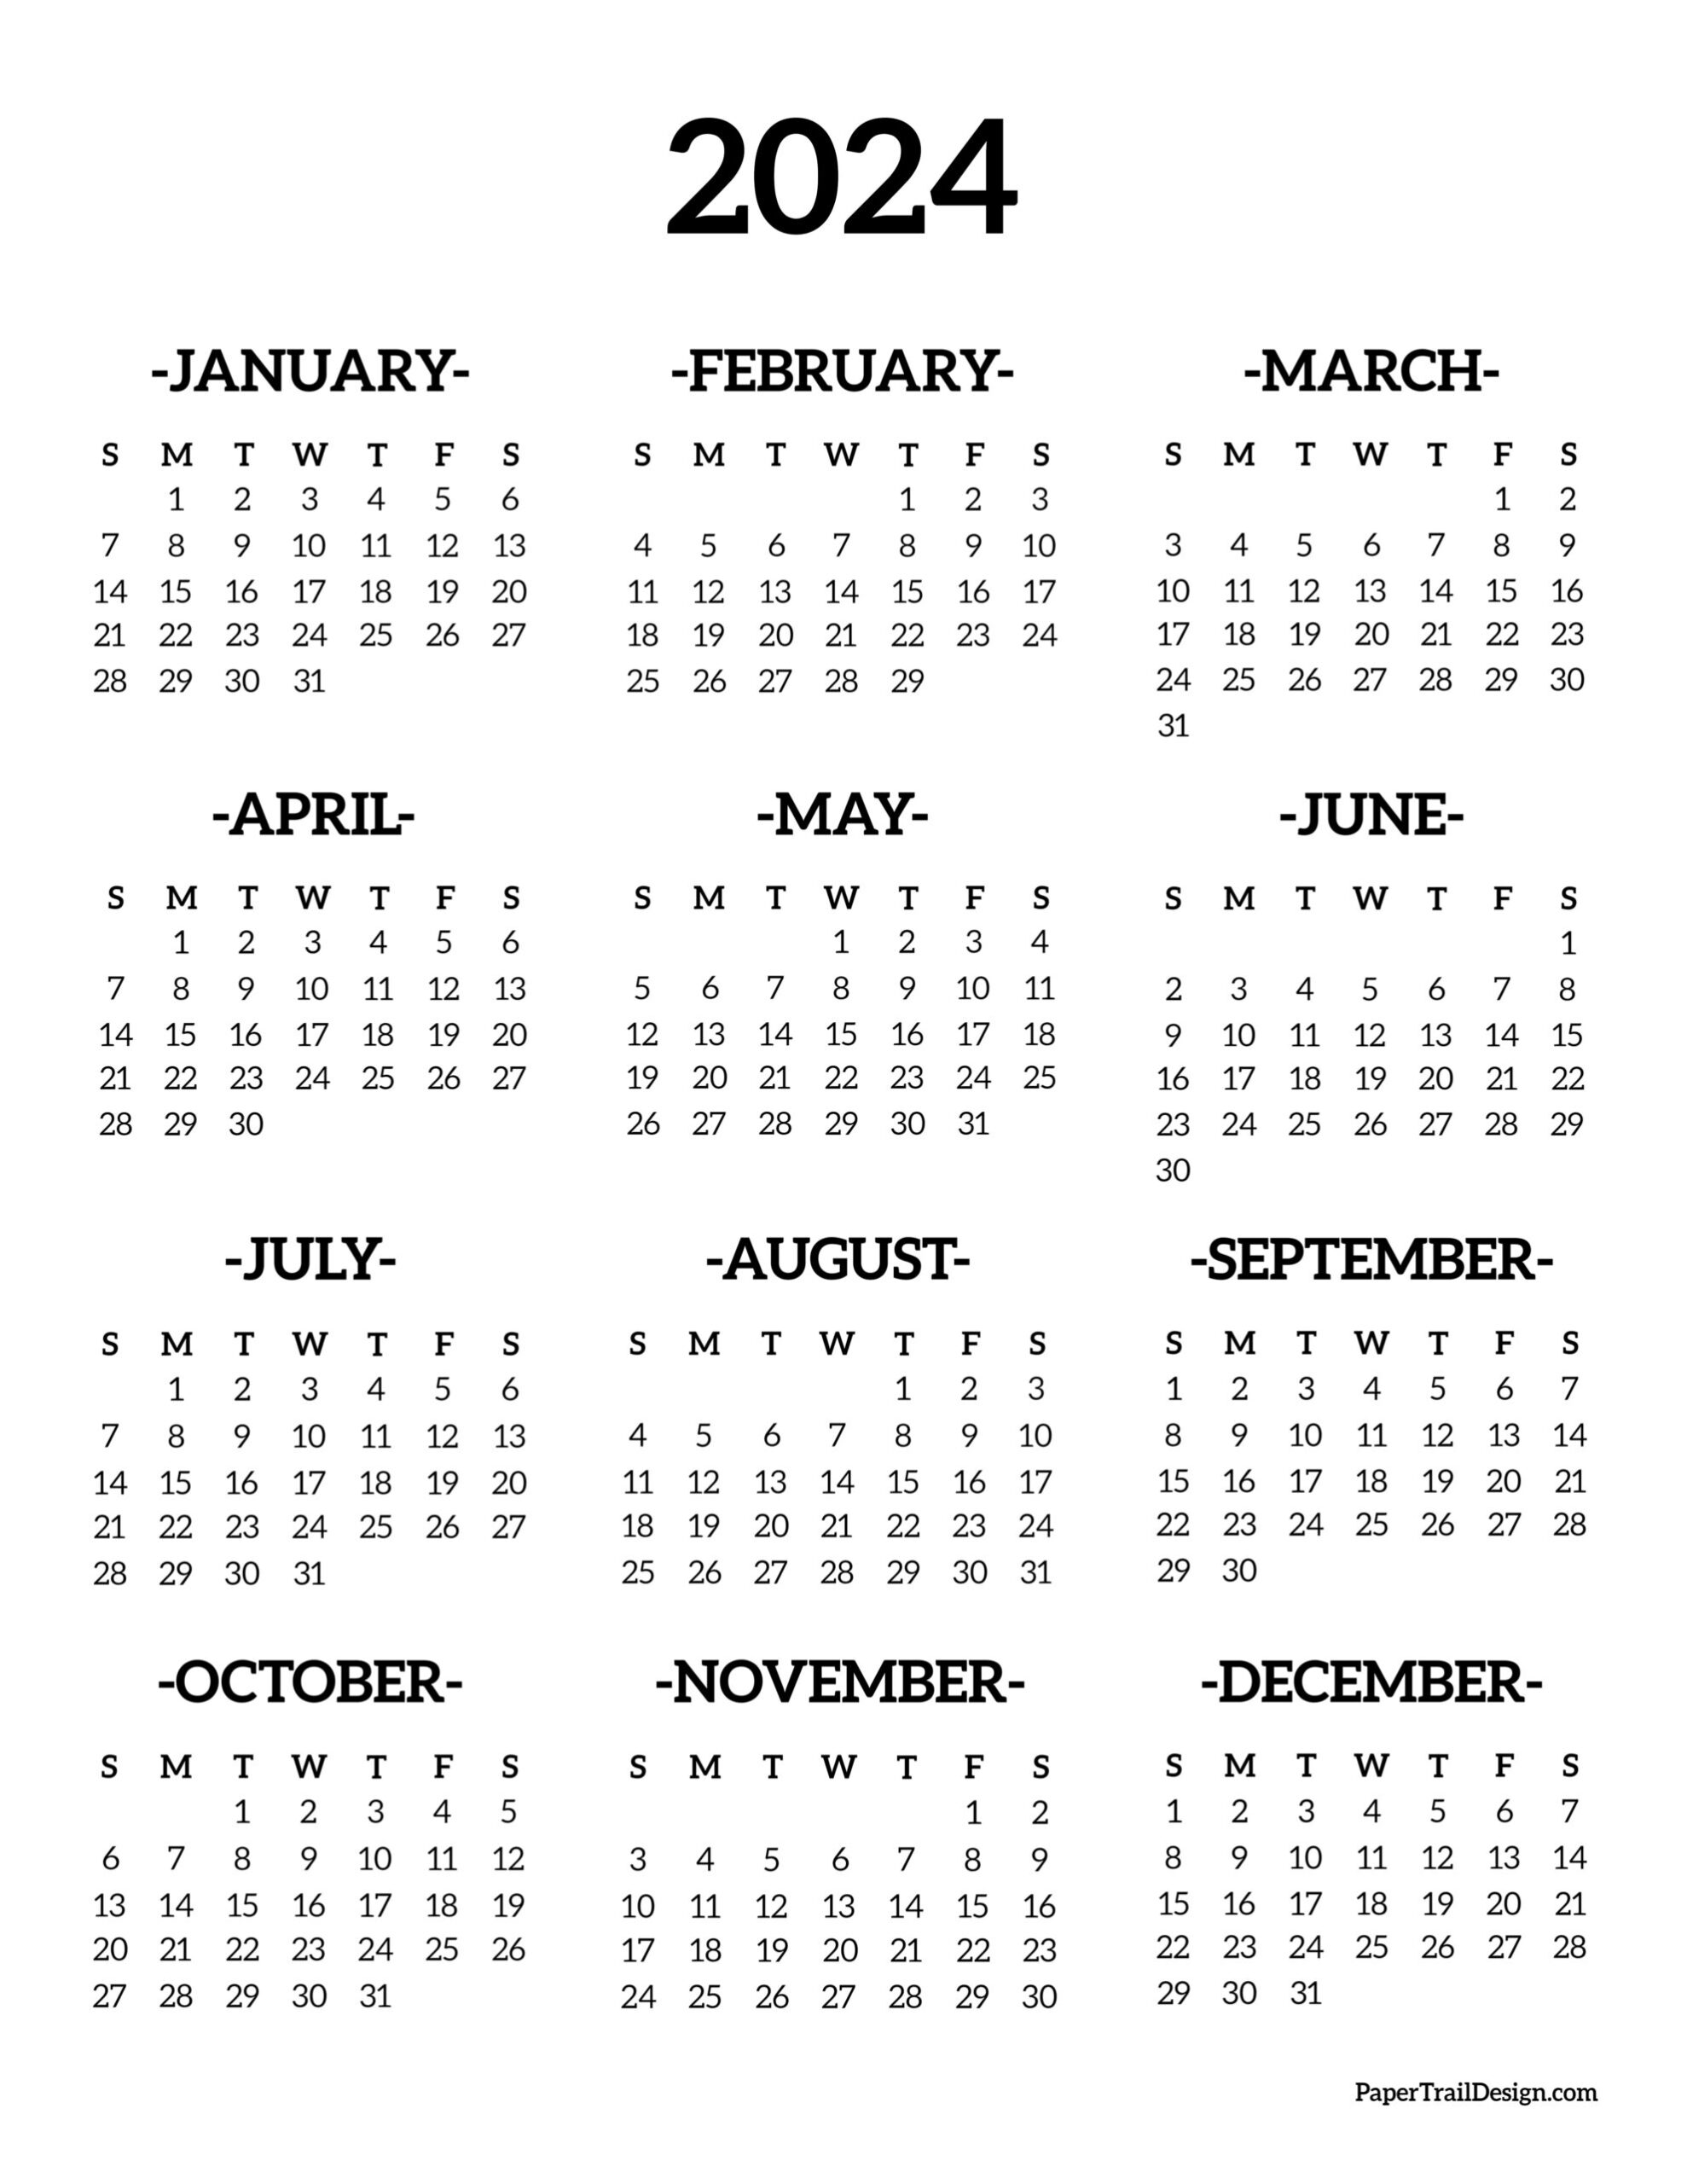 Calendar 2024 Printable One Page - Paper Trail Design for Free Printable Full Year 2024 Calendar